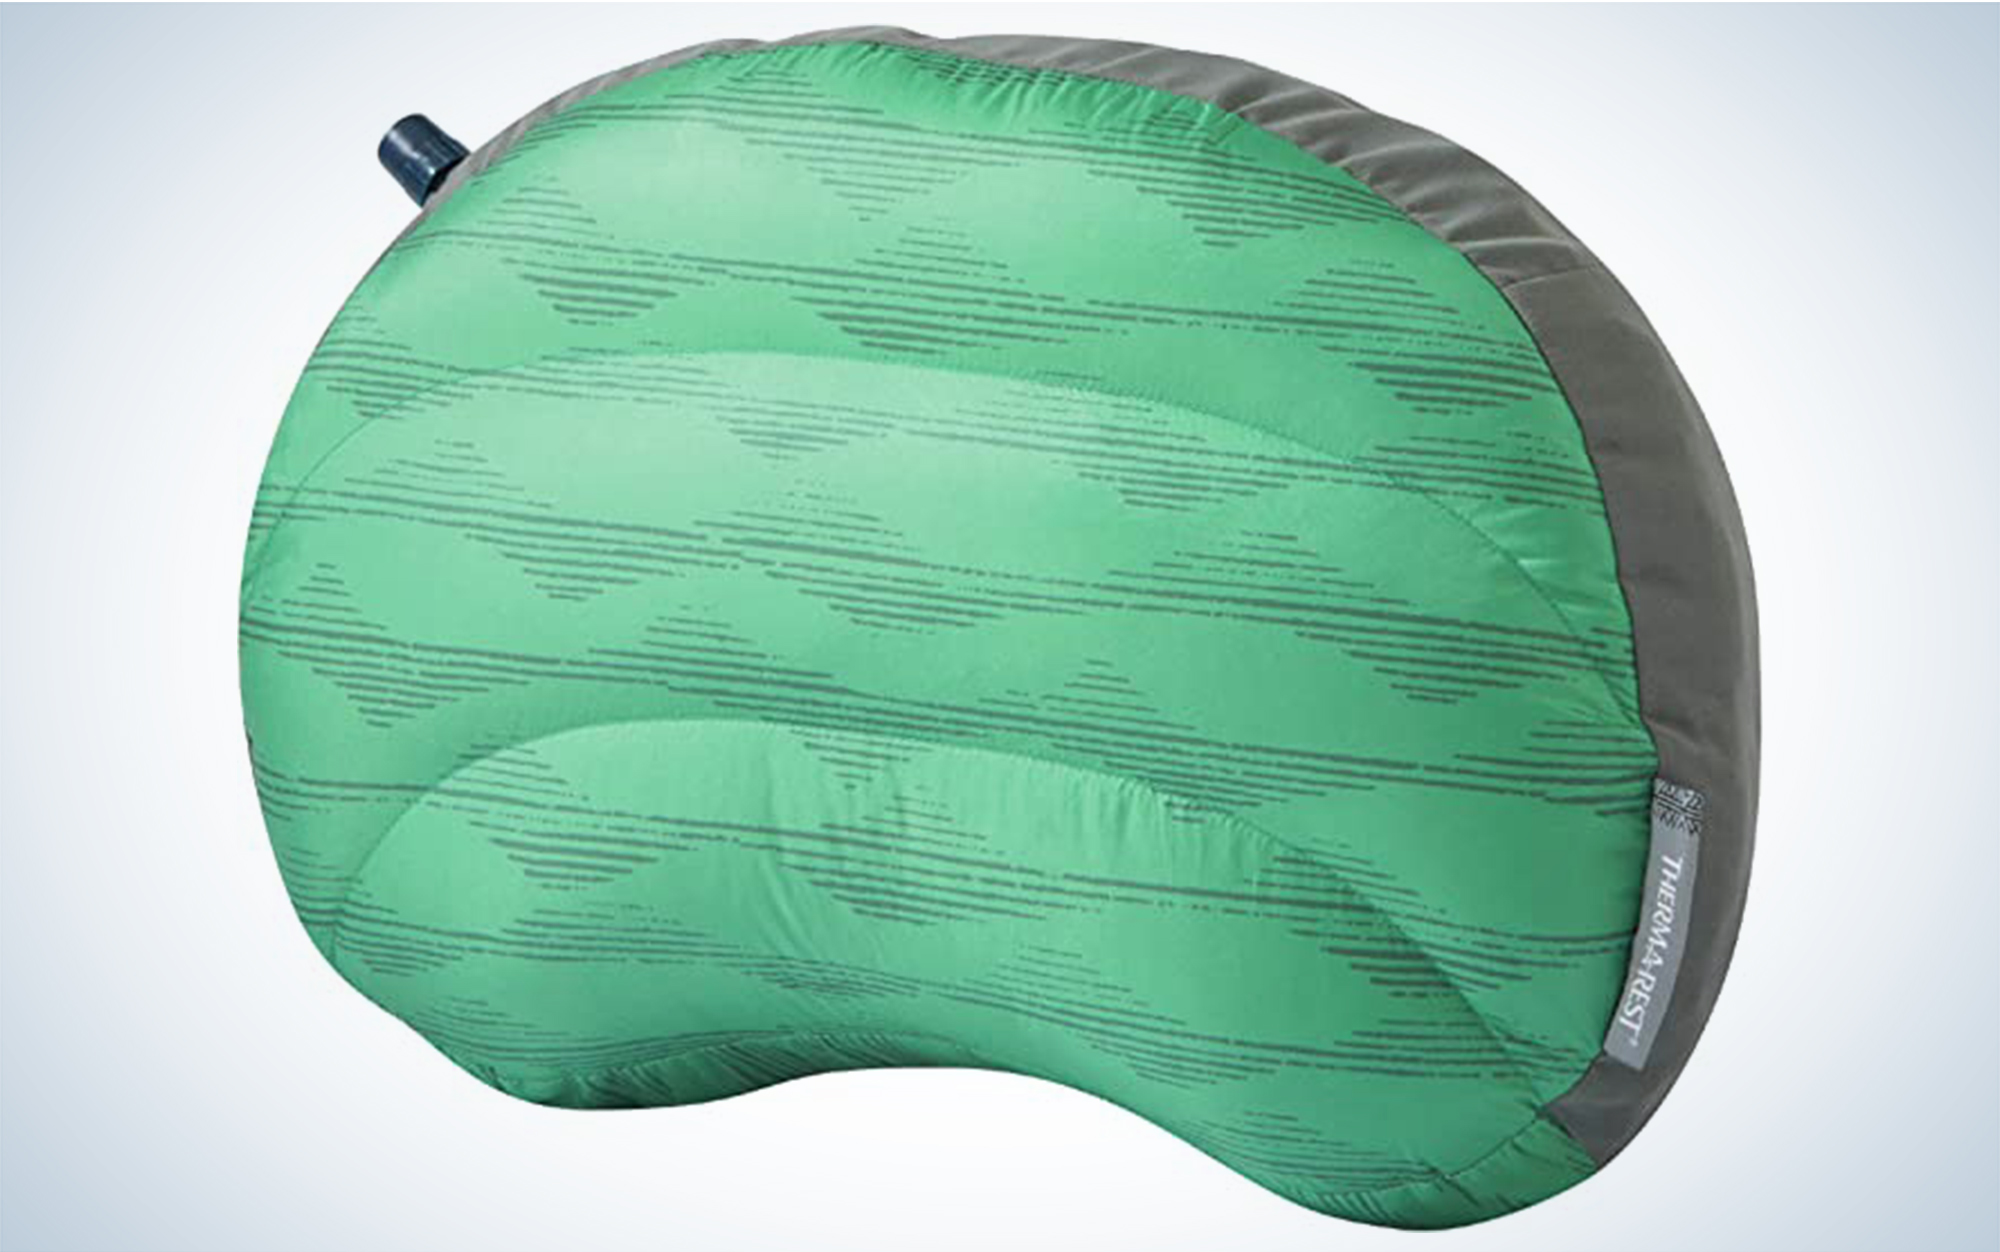 The Therm-a-Rest down pillow is a great gift for backpackers.